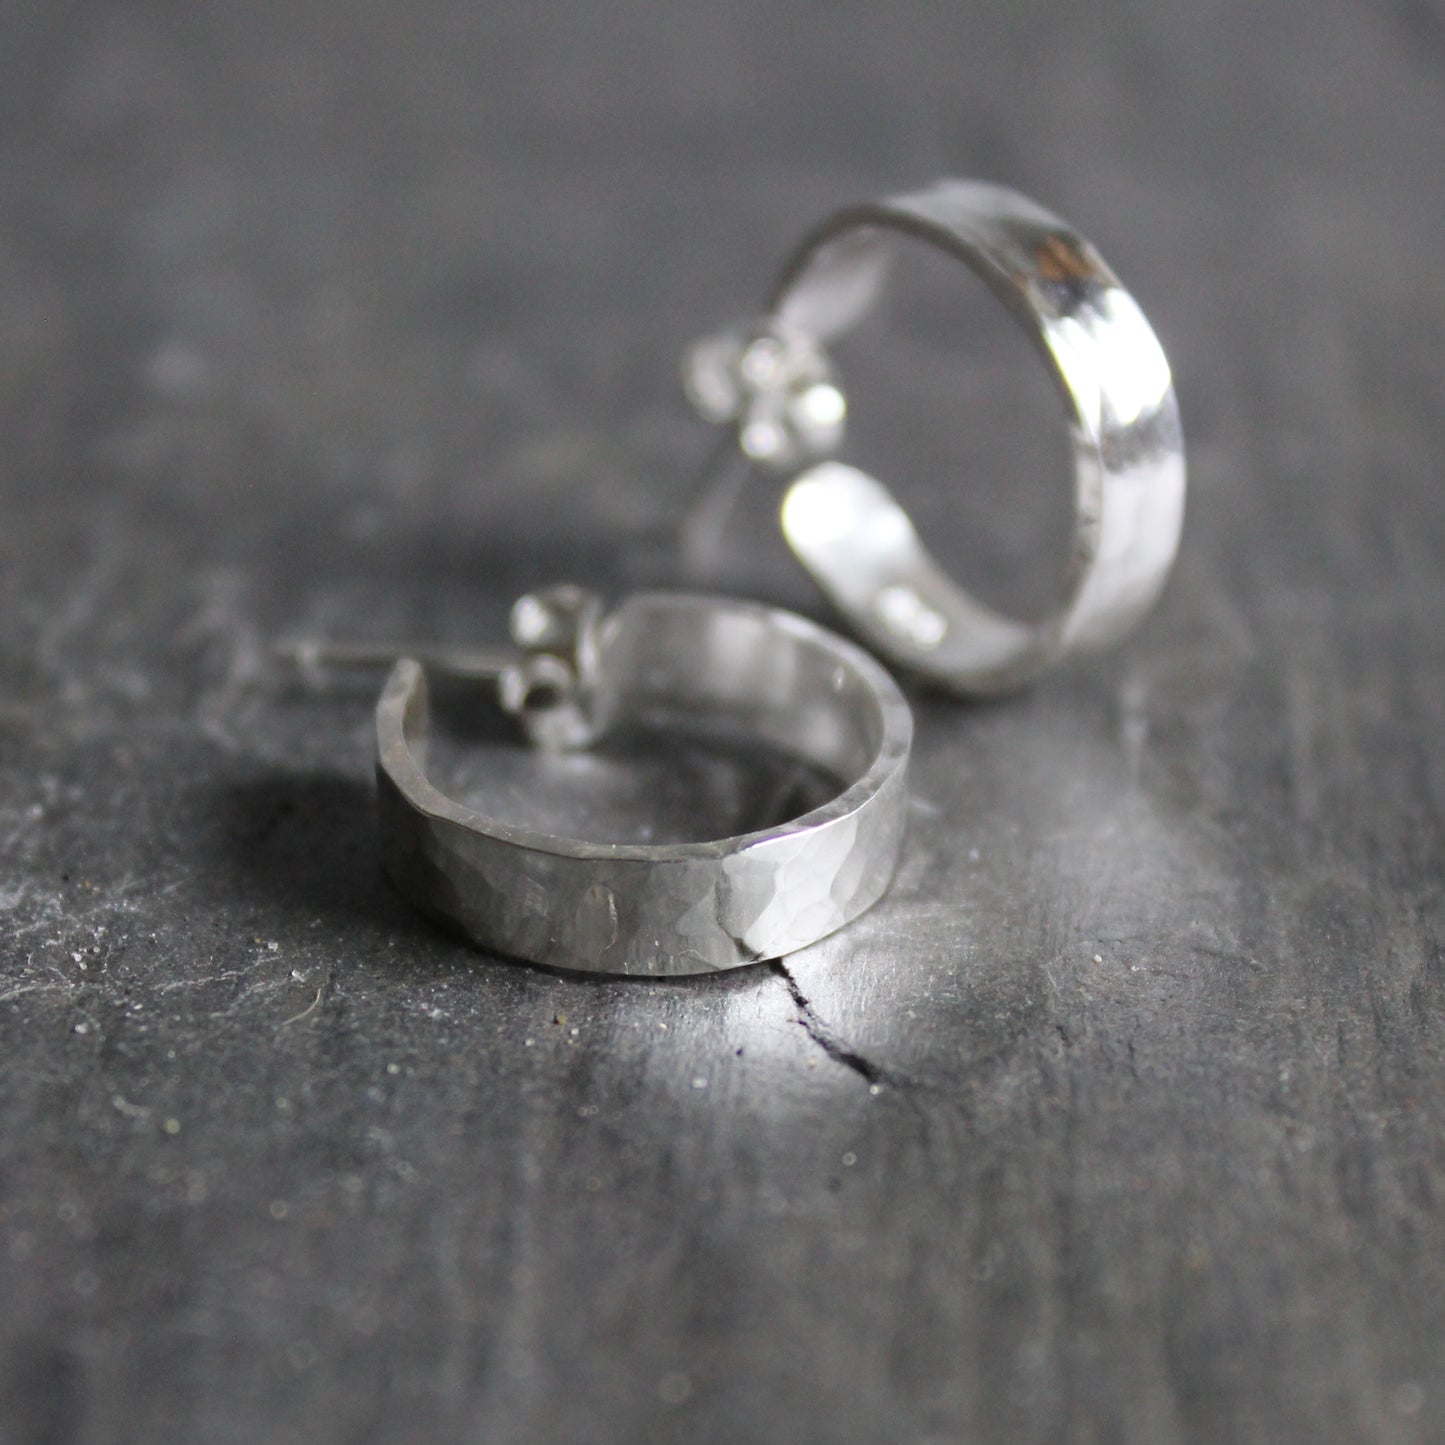 These hoop earrings are approximately 4mm wide and 1mm thick and the hoops are about 1/2" in diameter and finished on sterling silver posts.